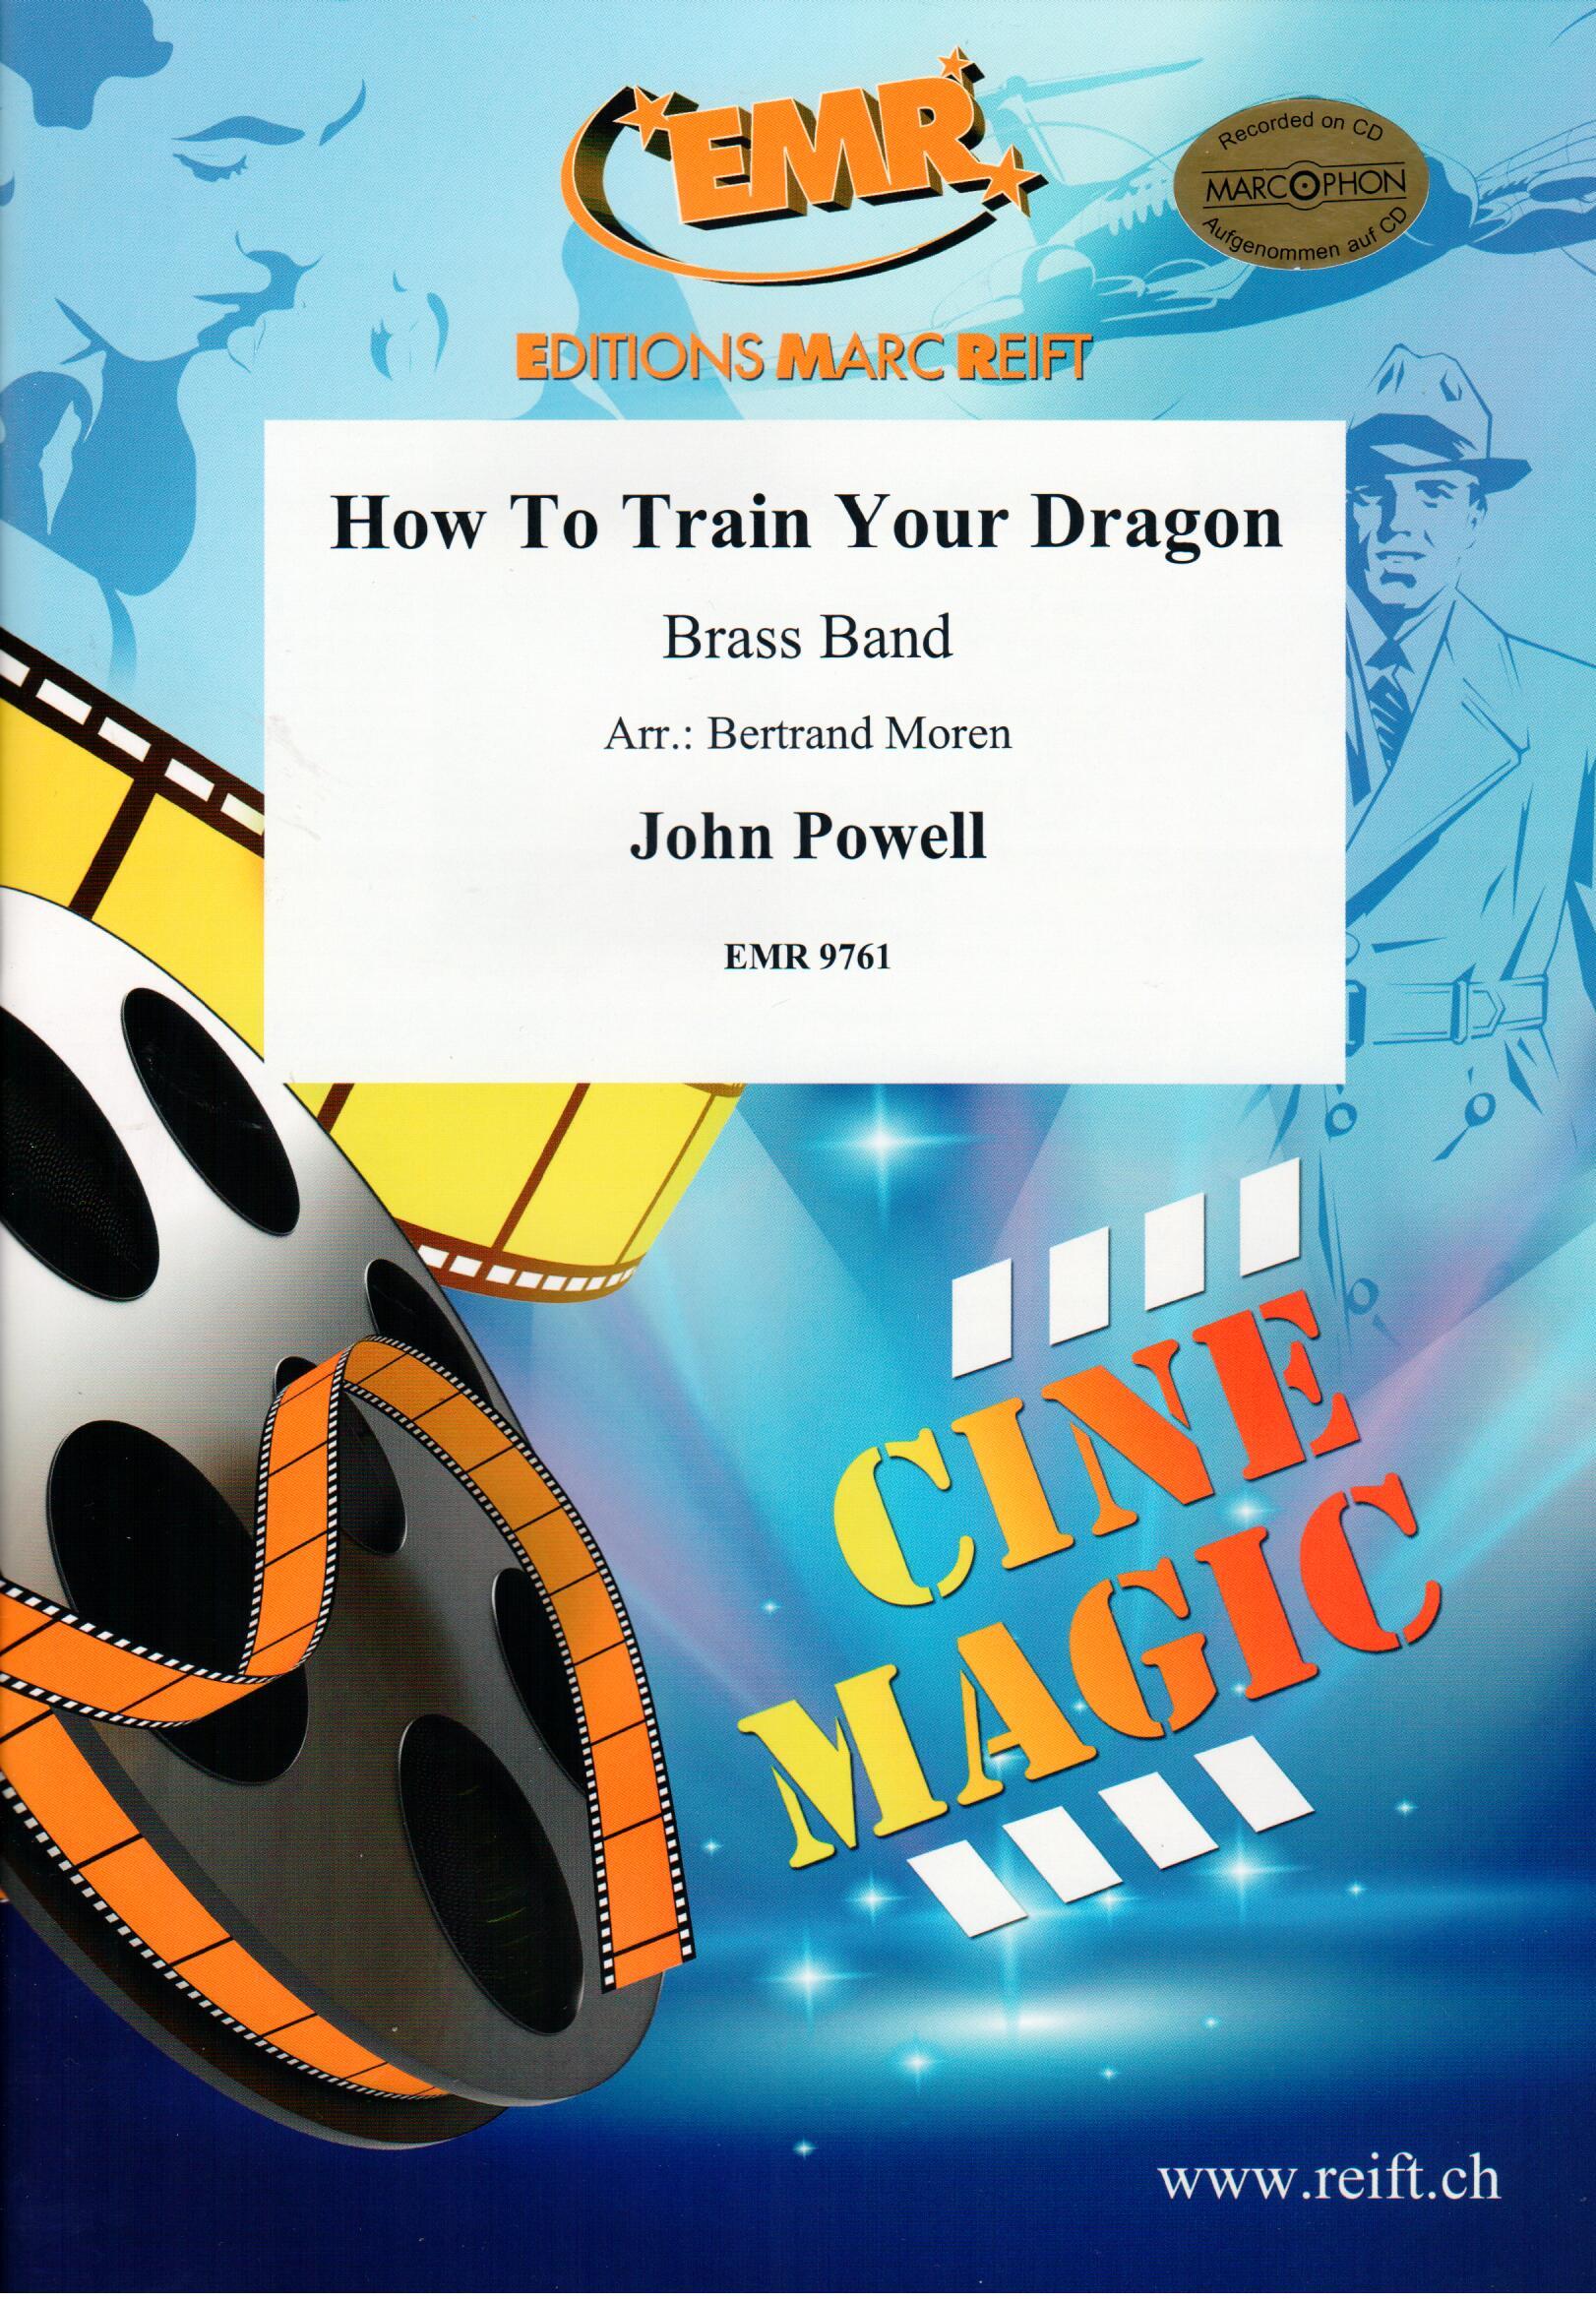 HOW TO TRAIN YOUR DRAGON - Parts & Score, FILM MUSIC & MUSICALS